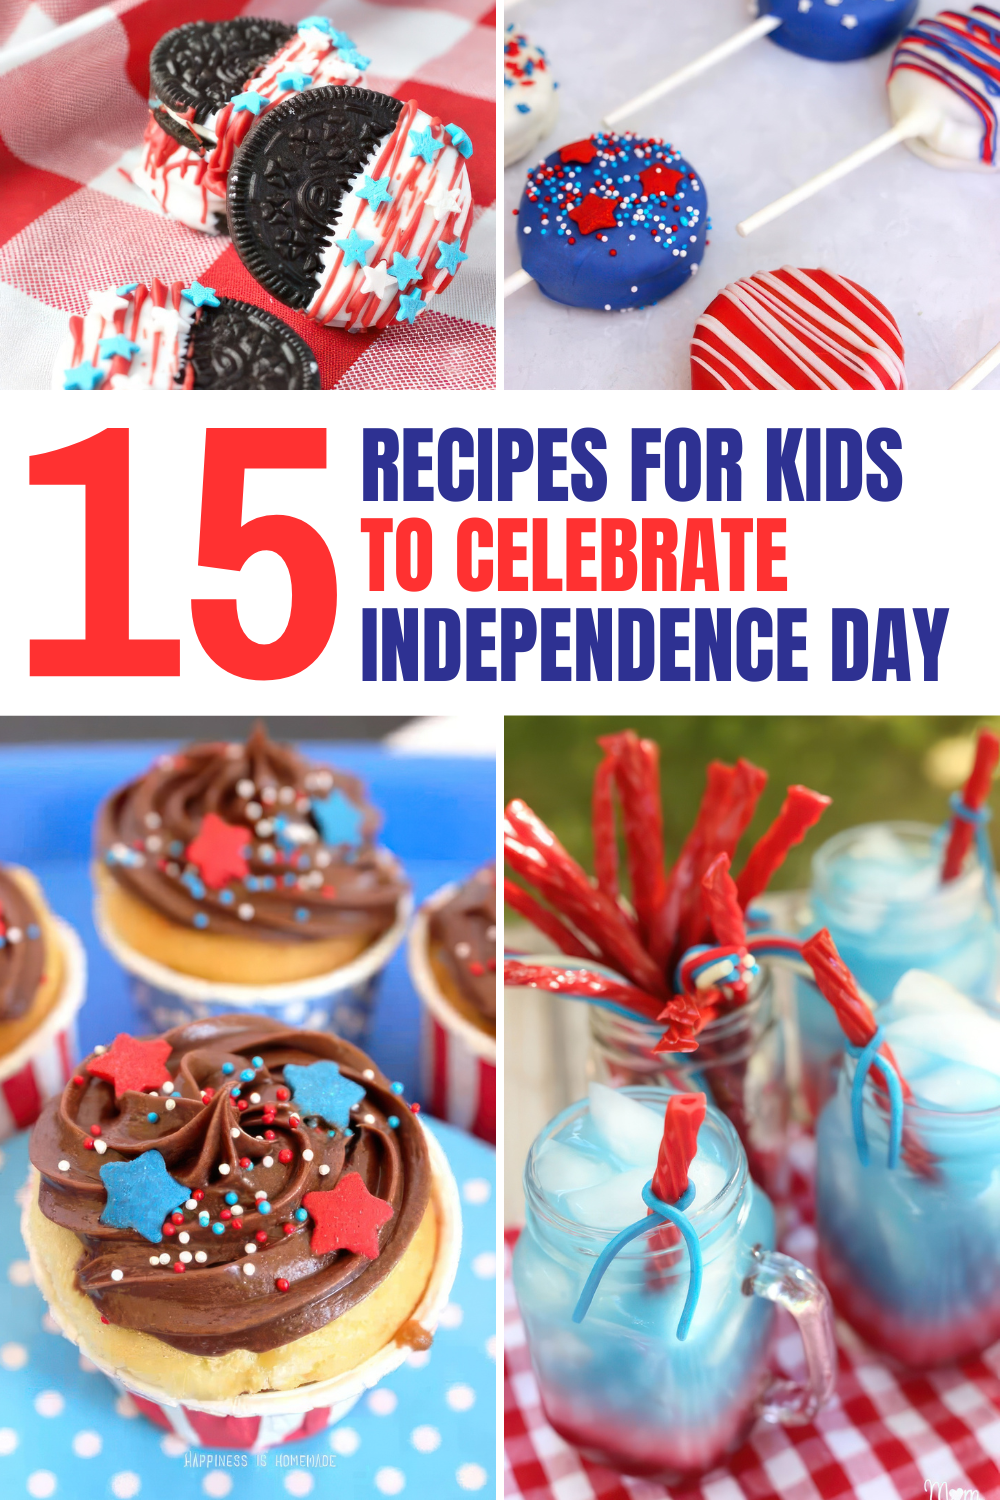 Get your kids involved in the kitchen with these simple and festive 4th of July recipes! Perfect for little chefs, these red, white, and blue treats will make your holiday extra special. Tap to see all the yummy creations! 🇺🇸🍉🎉

